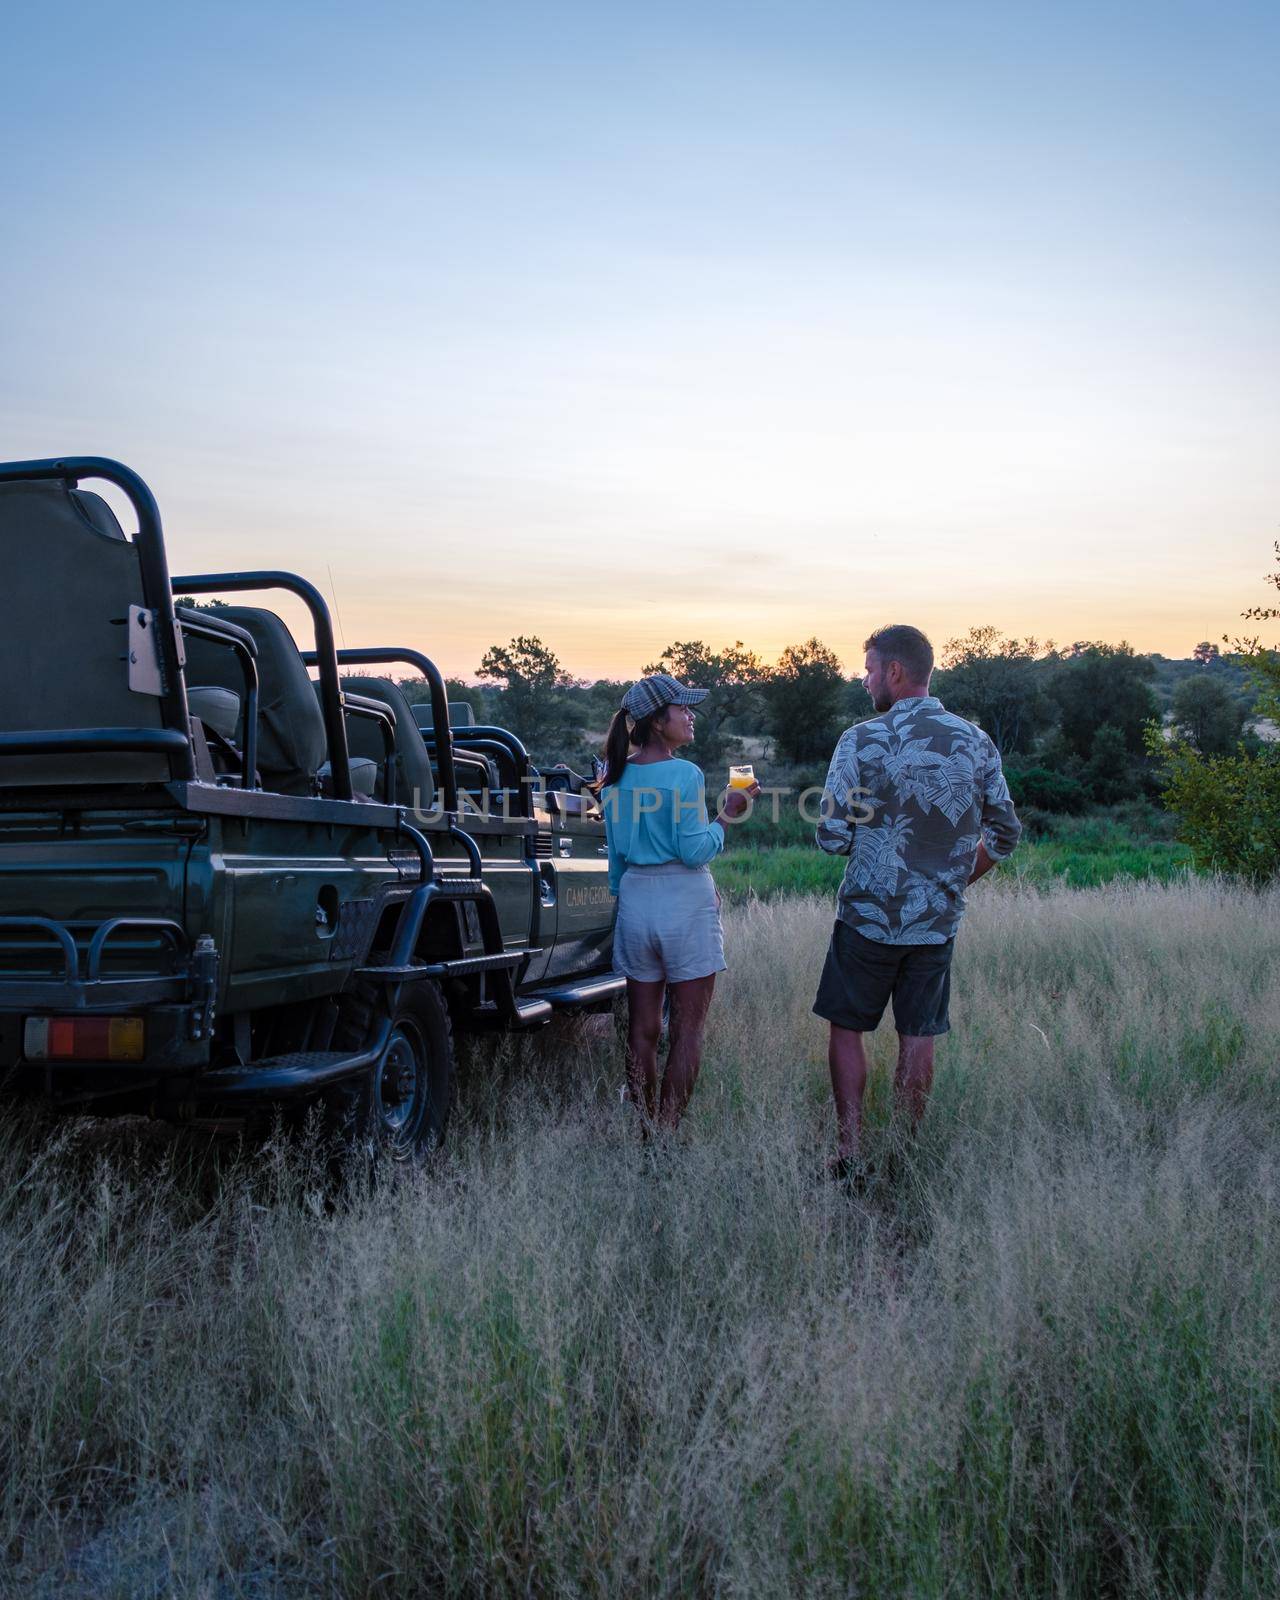 South Africa, luxury safari car during game drive, couple men and woman on safari in South Africa by fokkebok